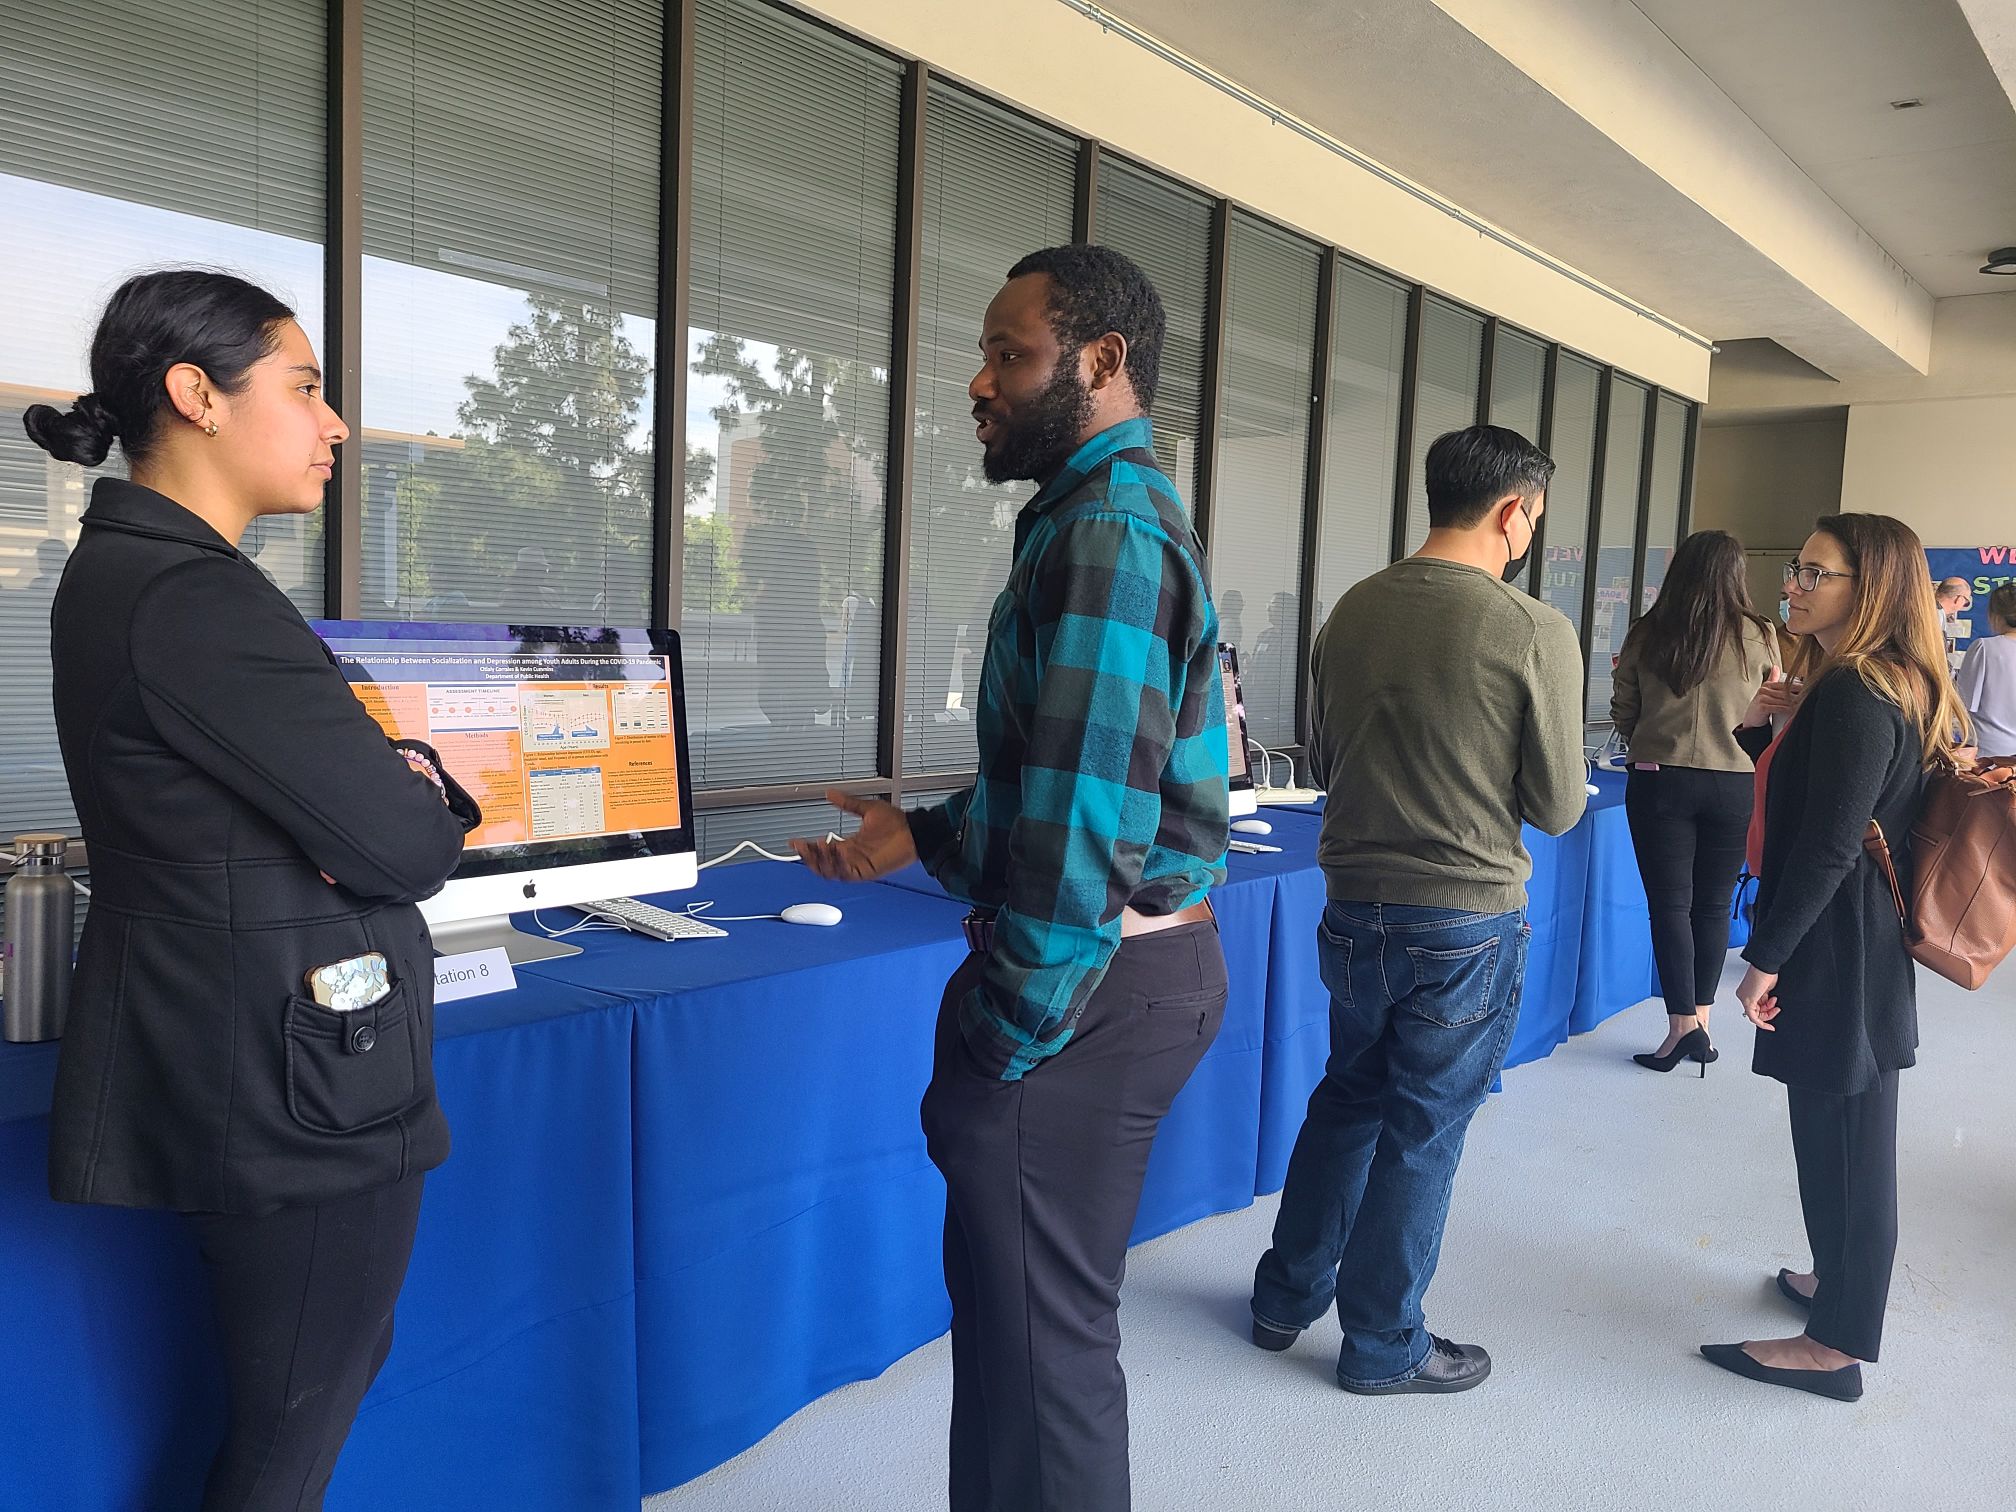 4th Annual Student Research Showcase Hosted by the College of Health and Human Development